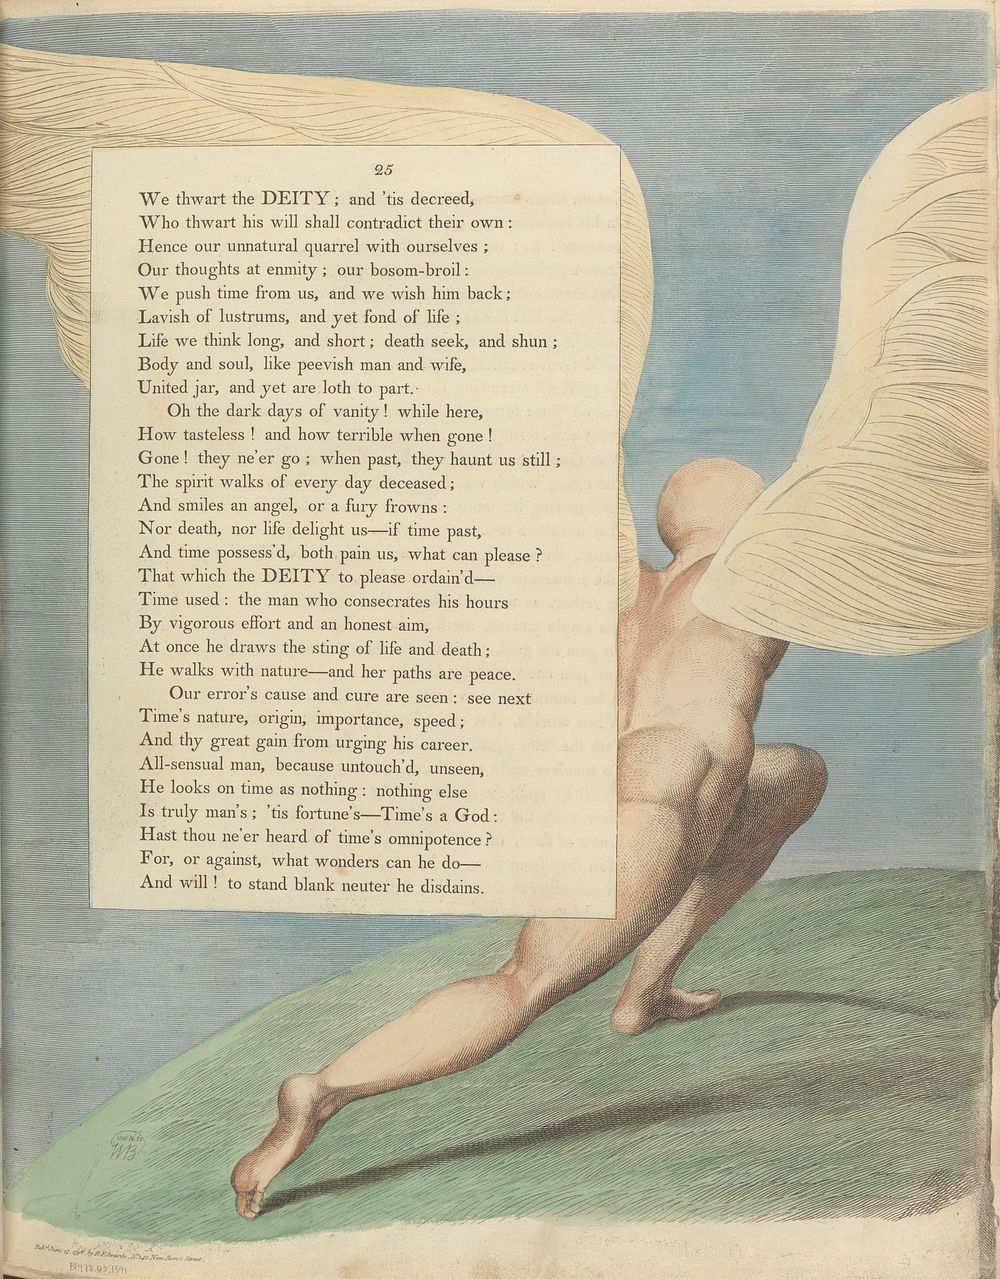 Young's Night Thoughts, Page 25, "Behold him, when past by; what then is seen" by William Blake. Original public domain…